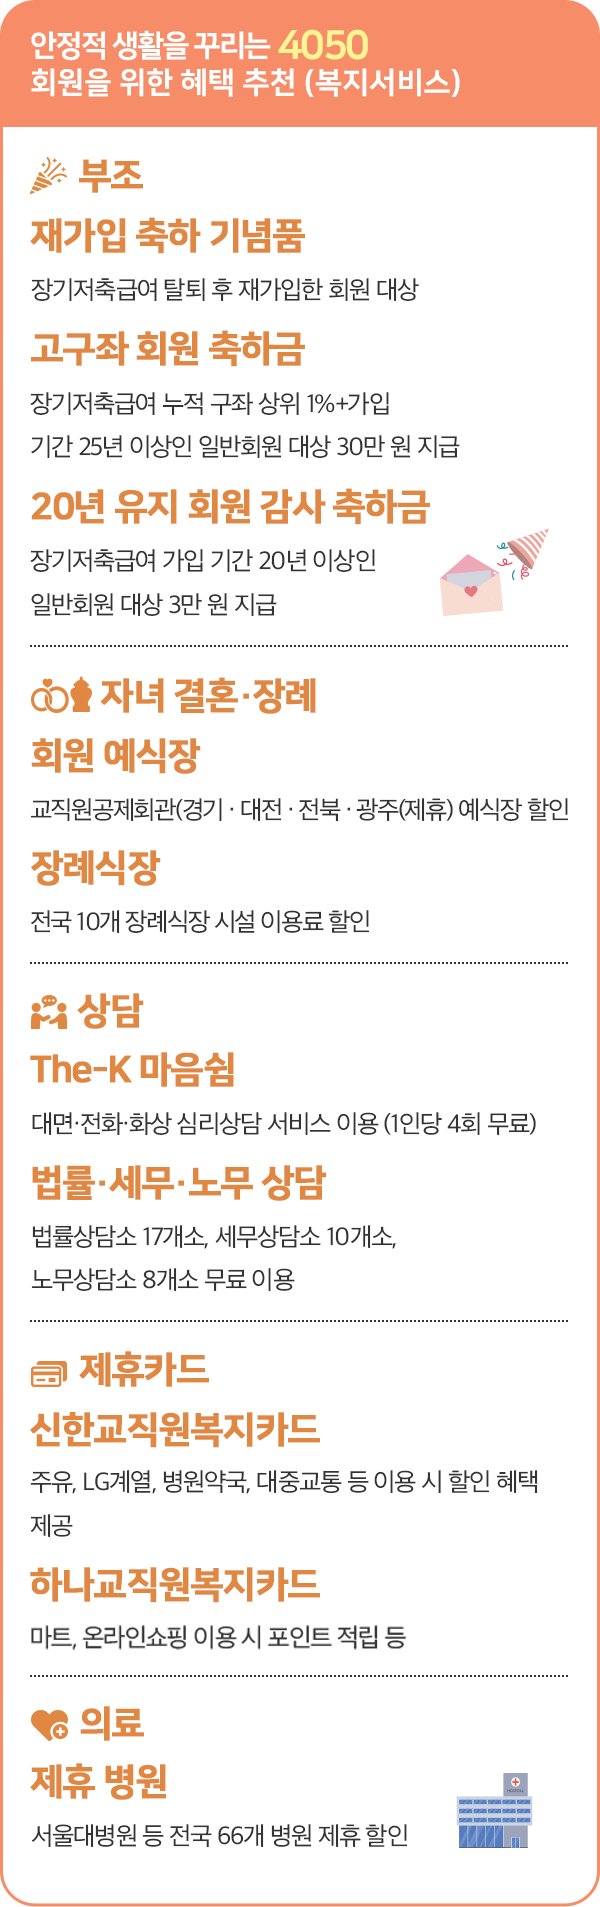 The-K 포커스 2_05